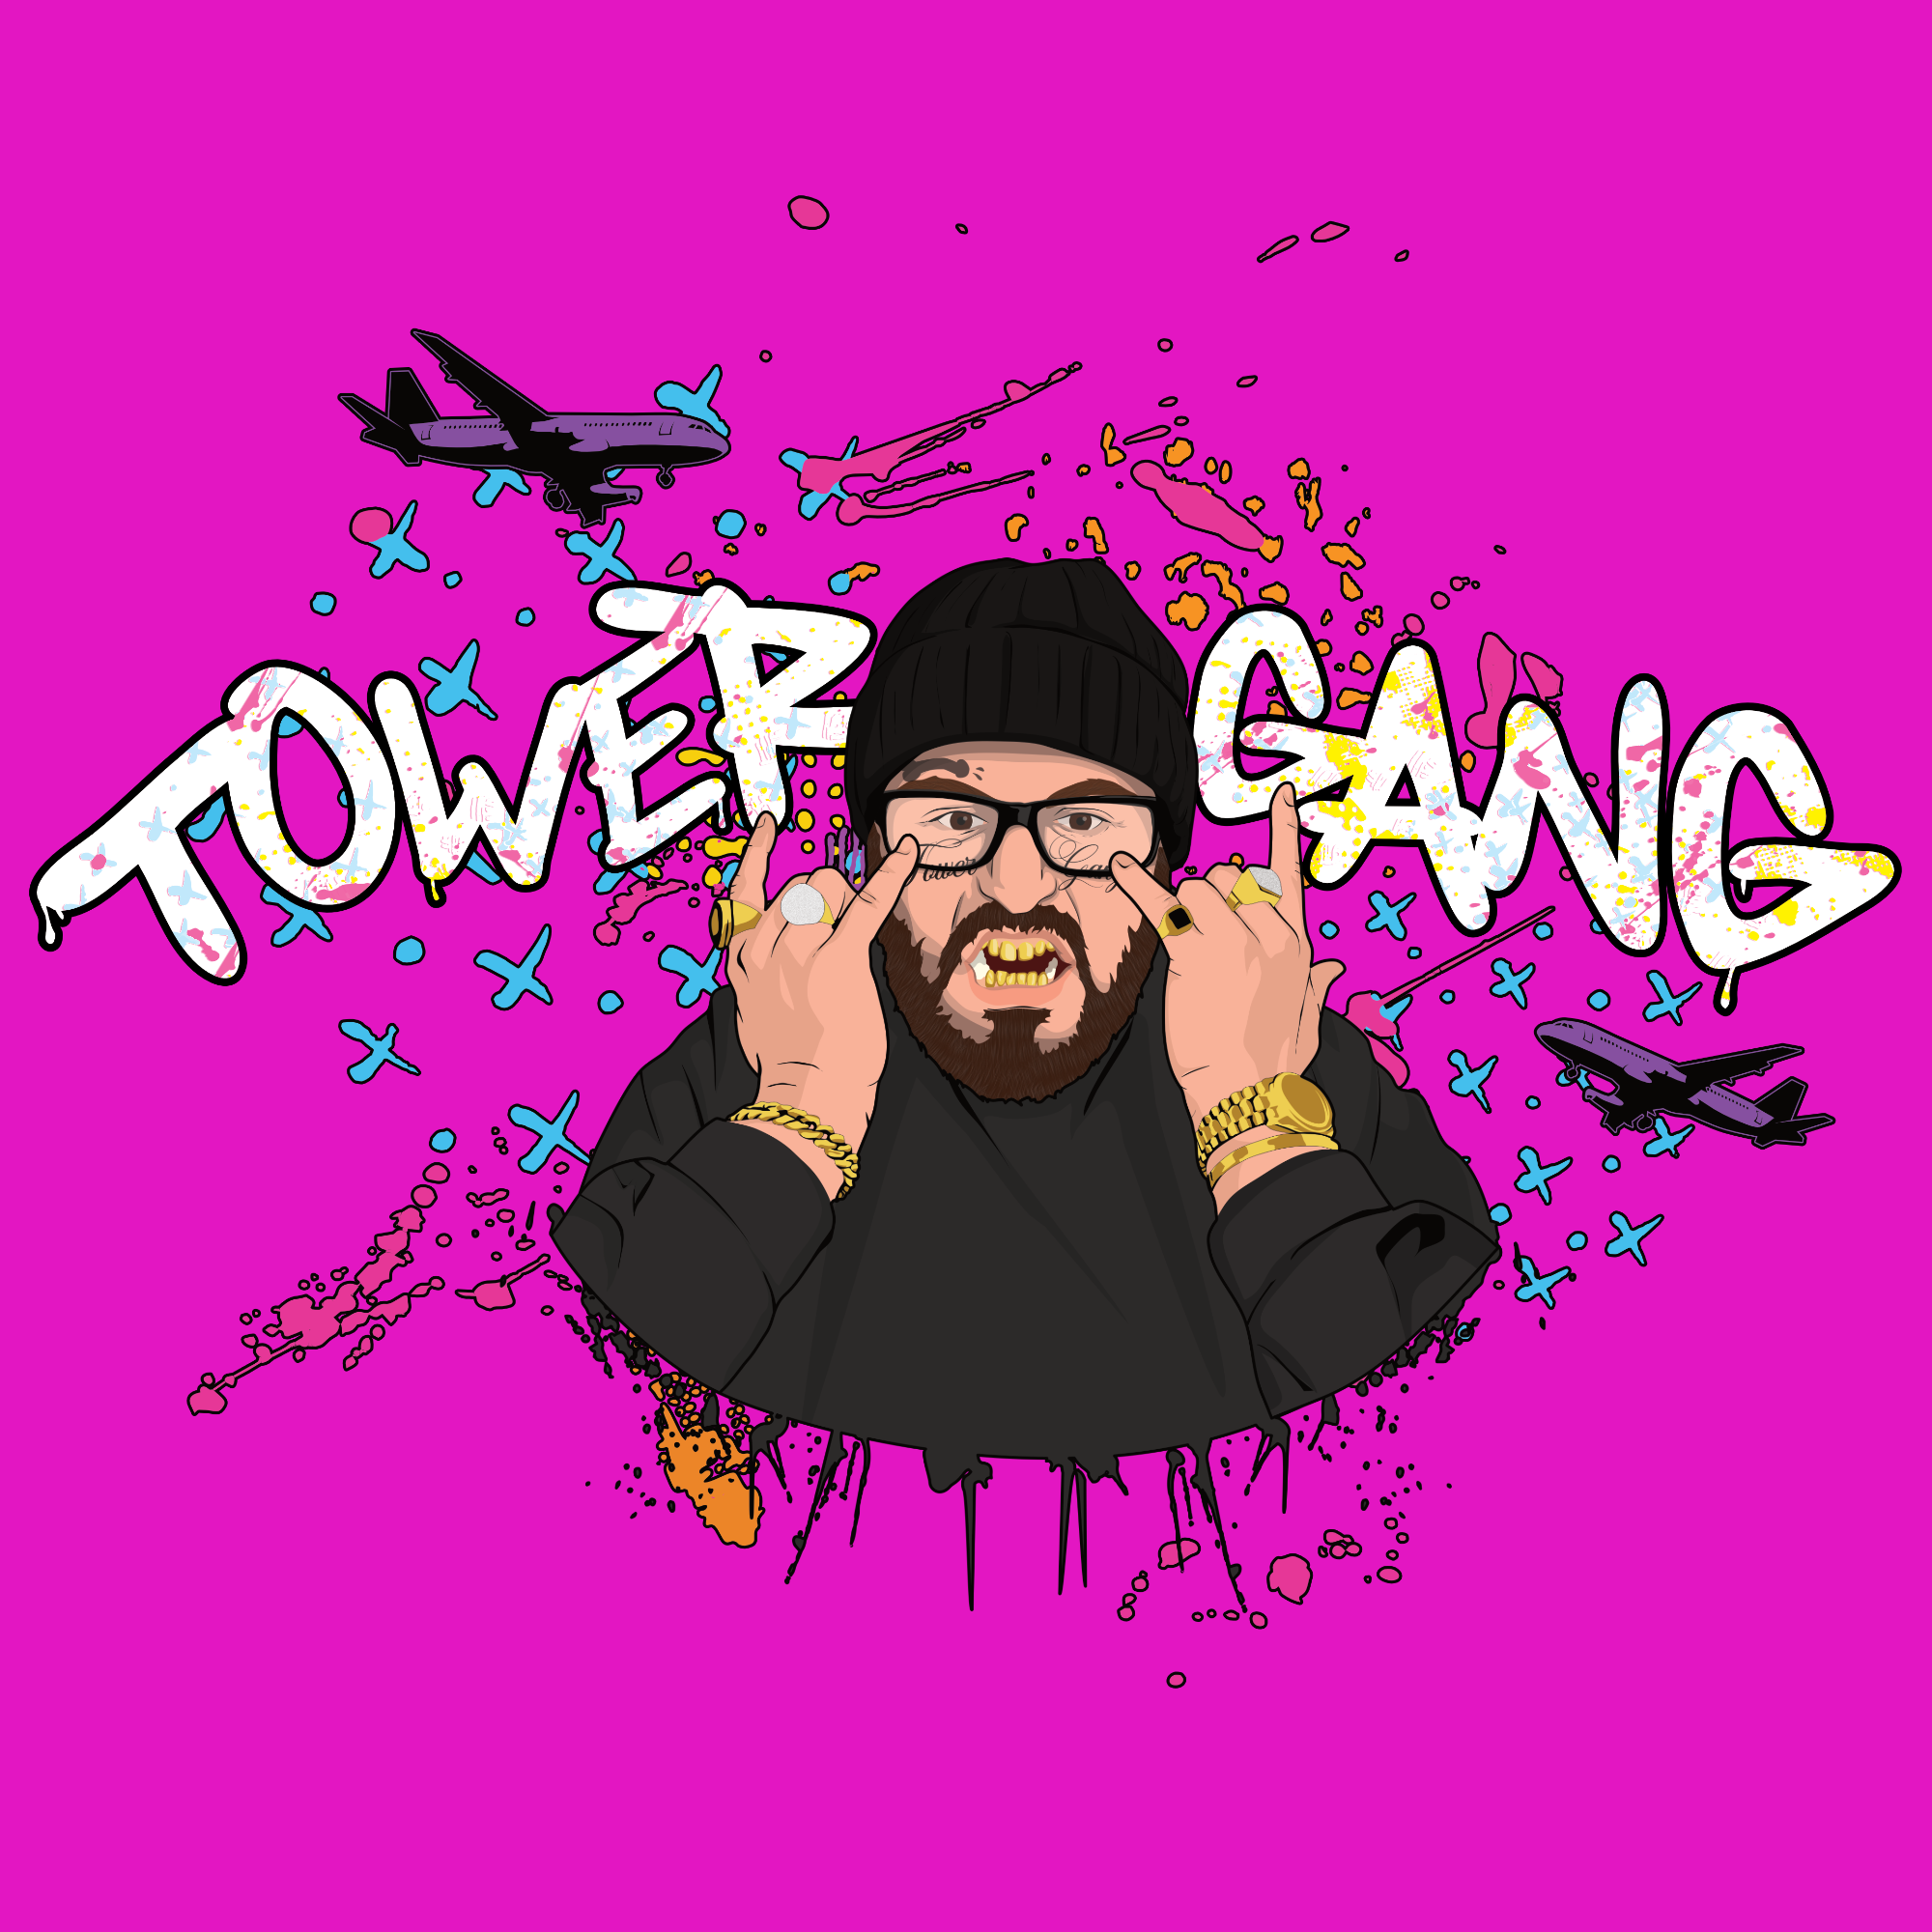 Tower Gang Toad